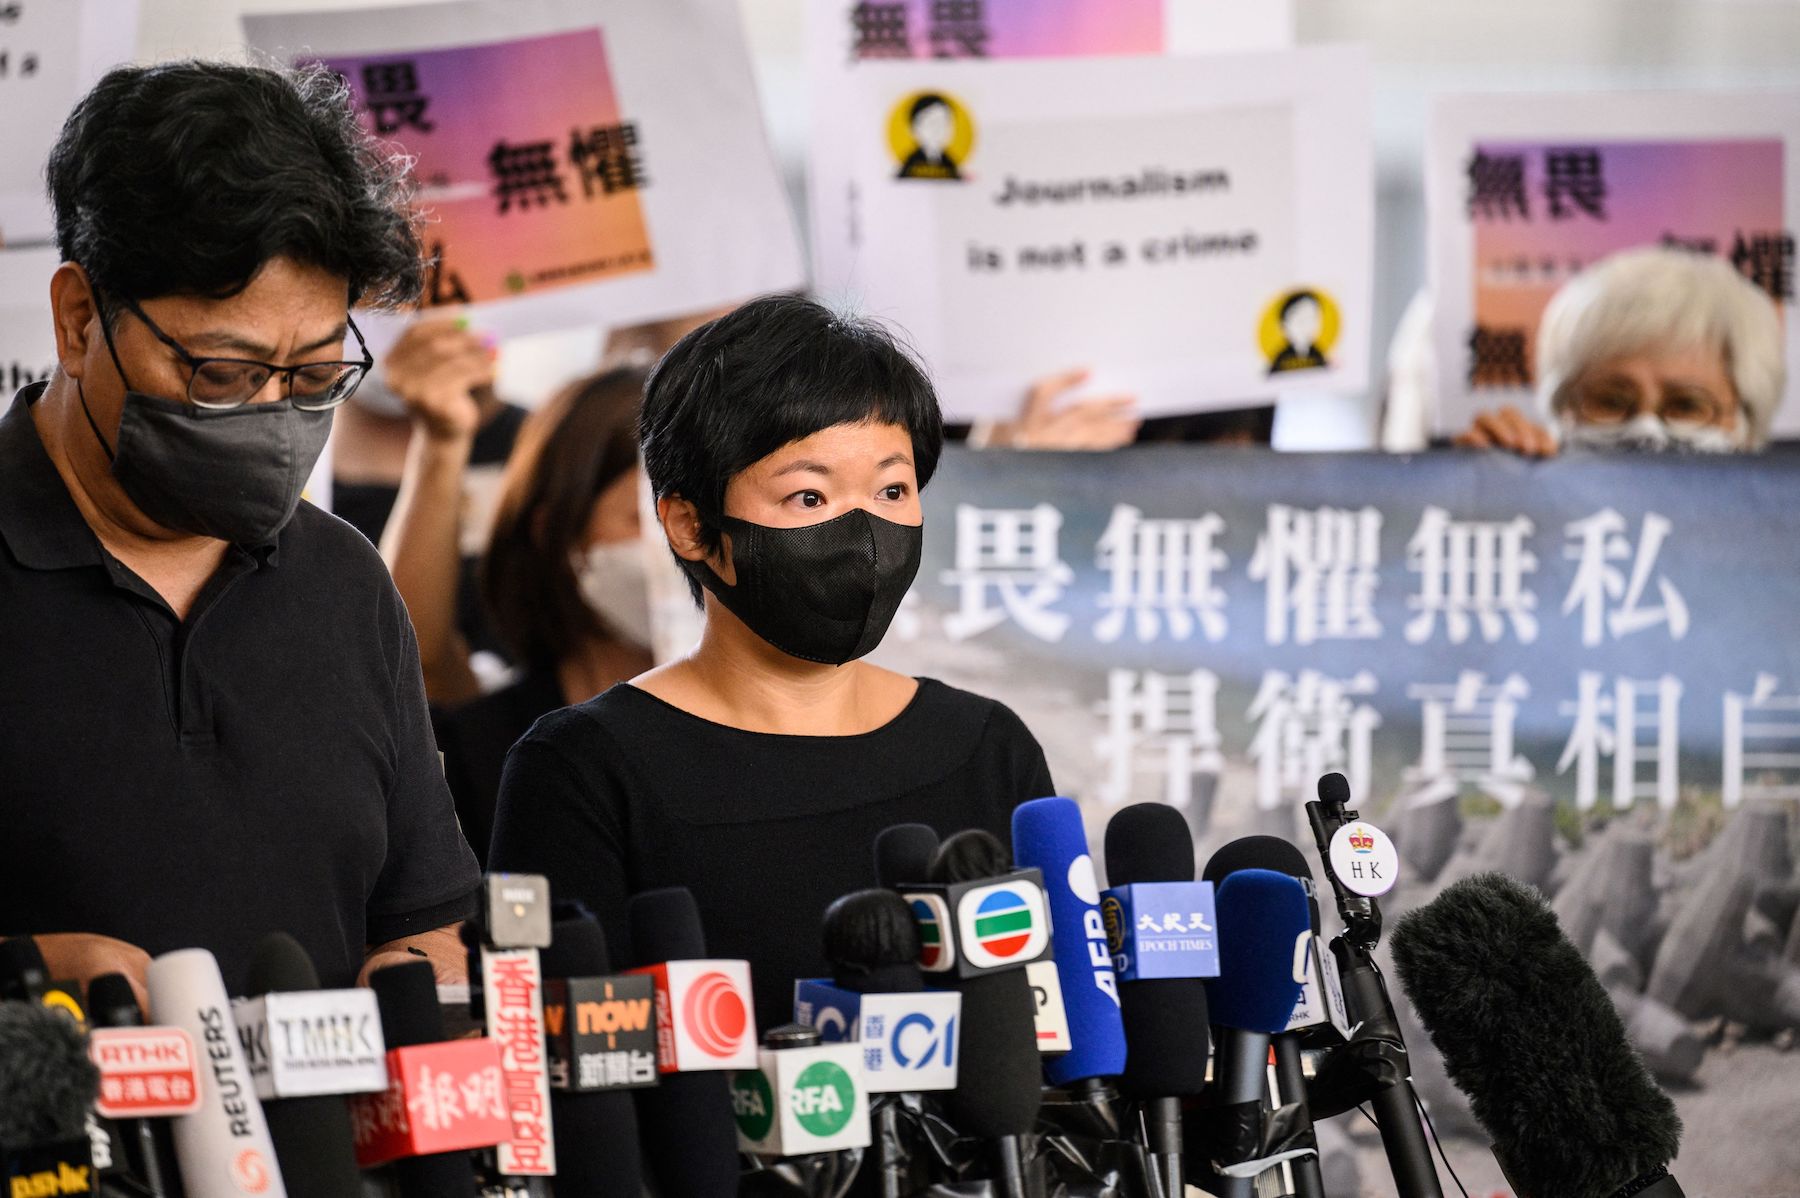 In A Rare Win In Hong Kong, A Court Overturned This Journalist’s Conviction For Doing Her Job